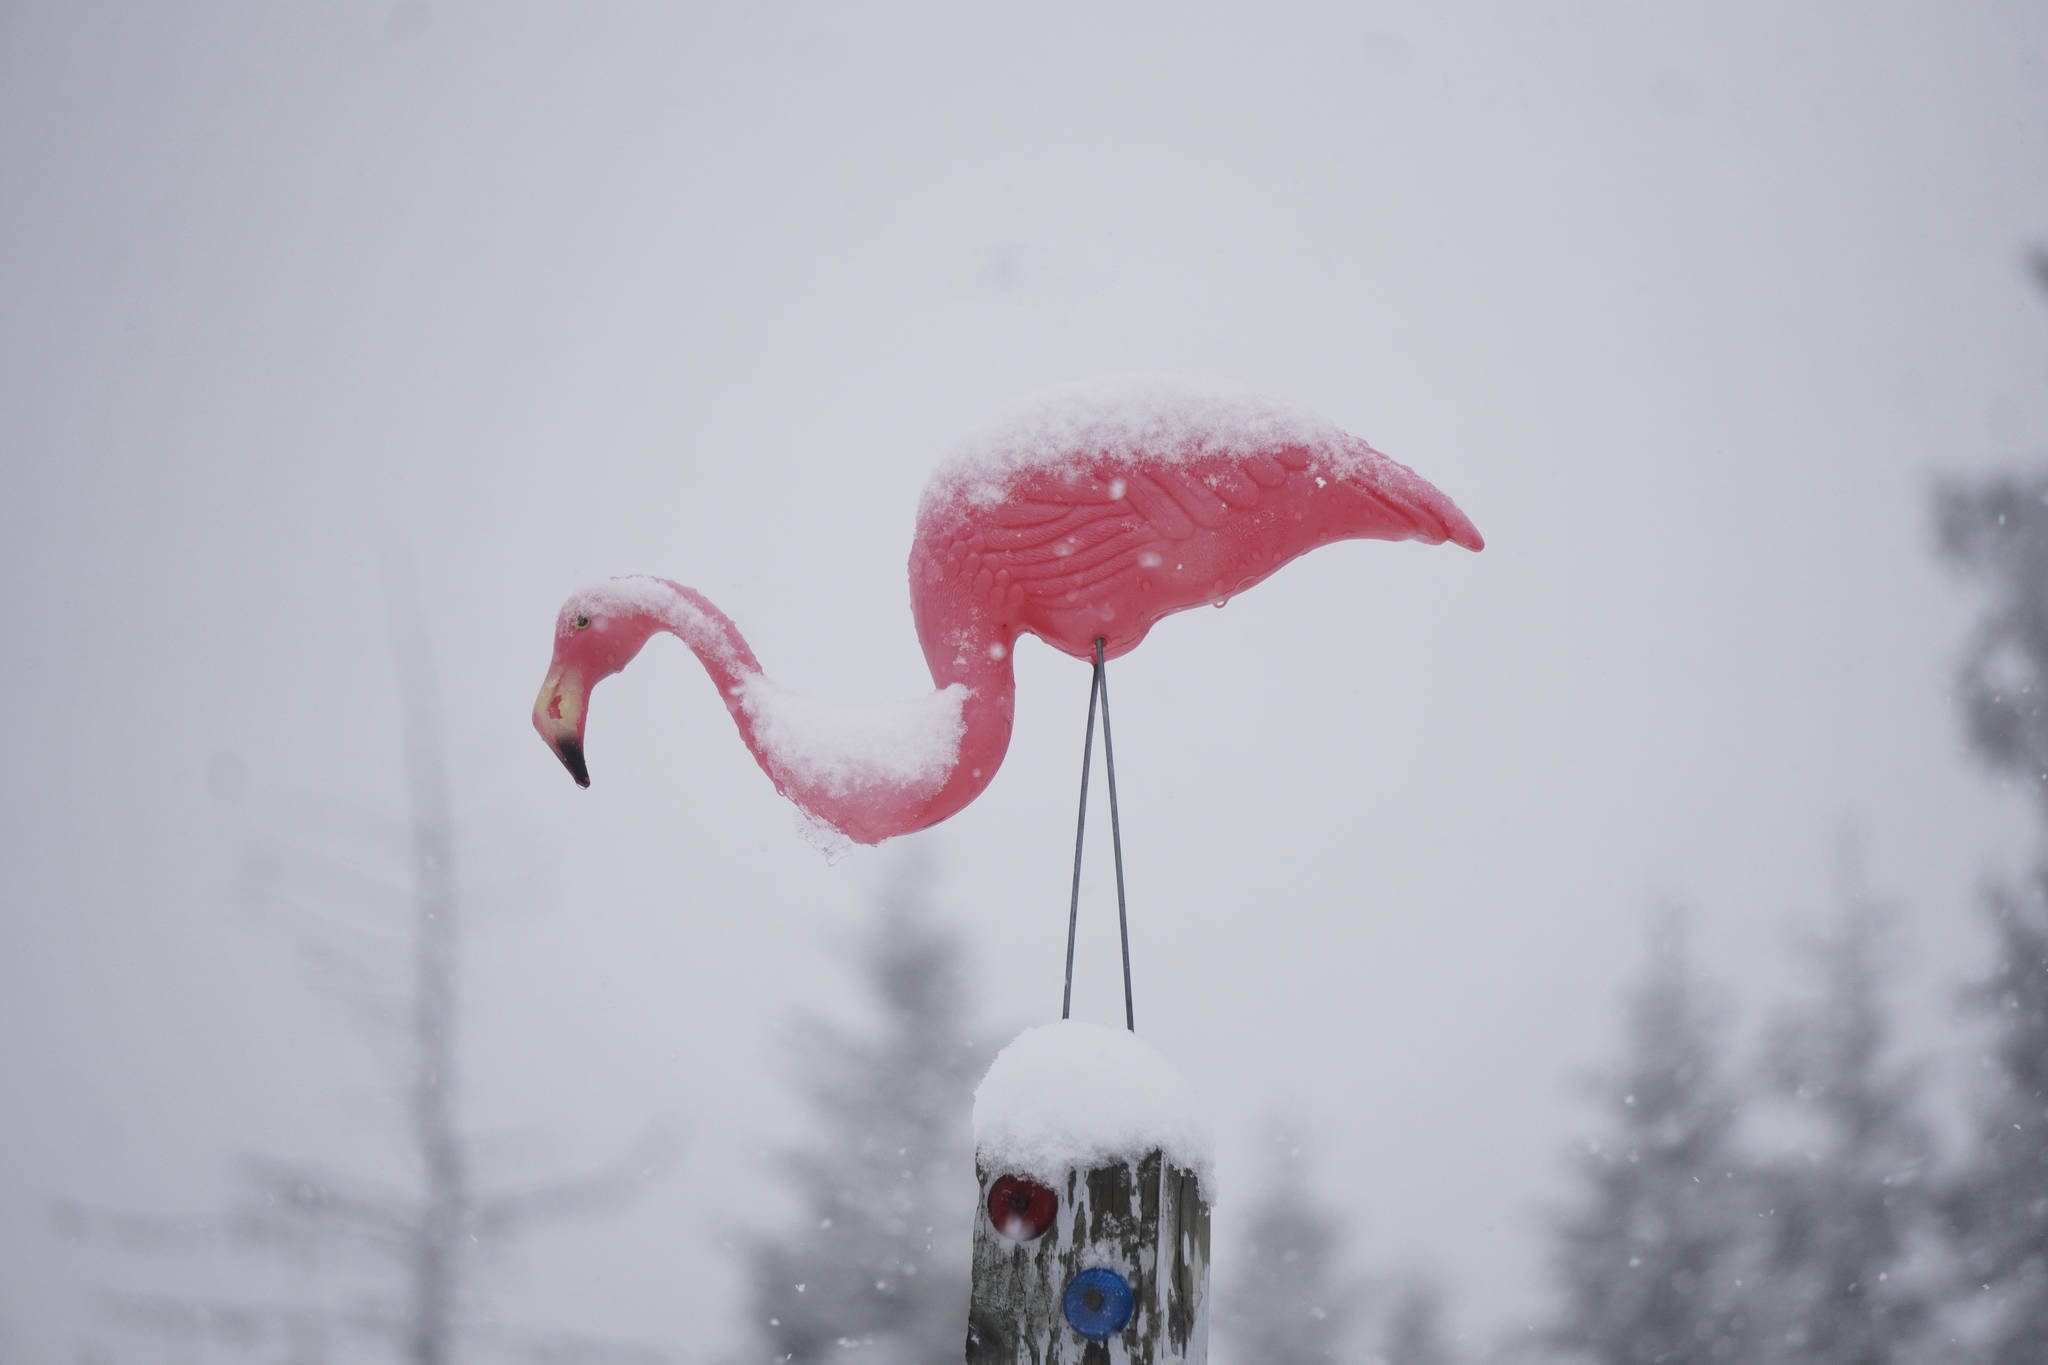 Snow falls on a pink flamingo lawn decoration on Sunday afternoon, April 21, 2019, on Diamond Ridge Road in Homer, Alaska. A spring snowstorm dropped about 6 inches of snow on Homer over the weekend. (Photo by Michael Armstrong/Homer News)